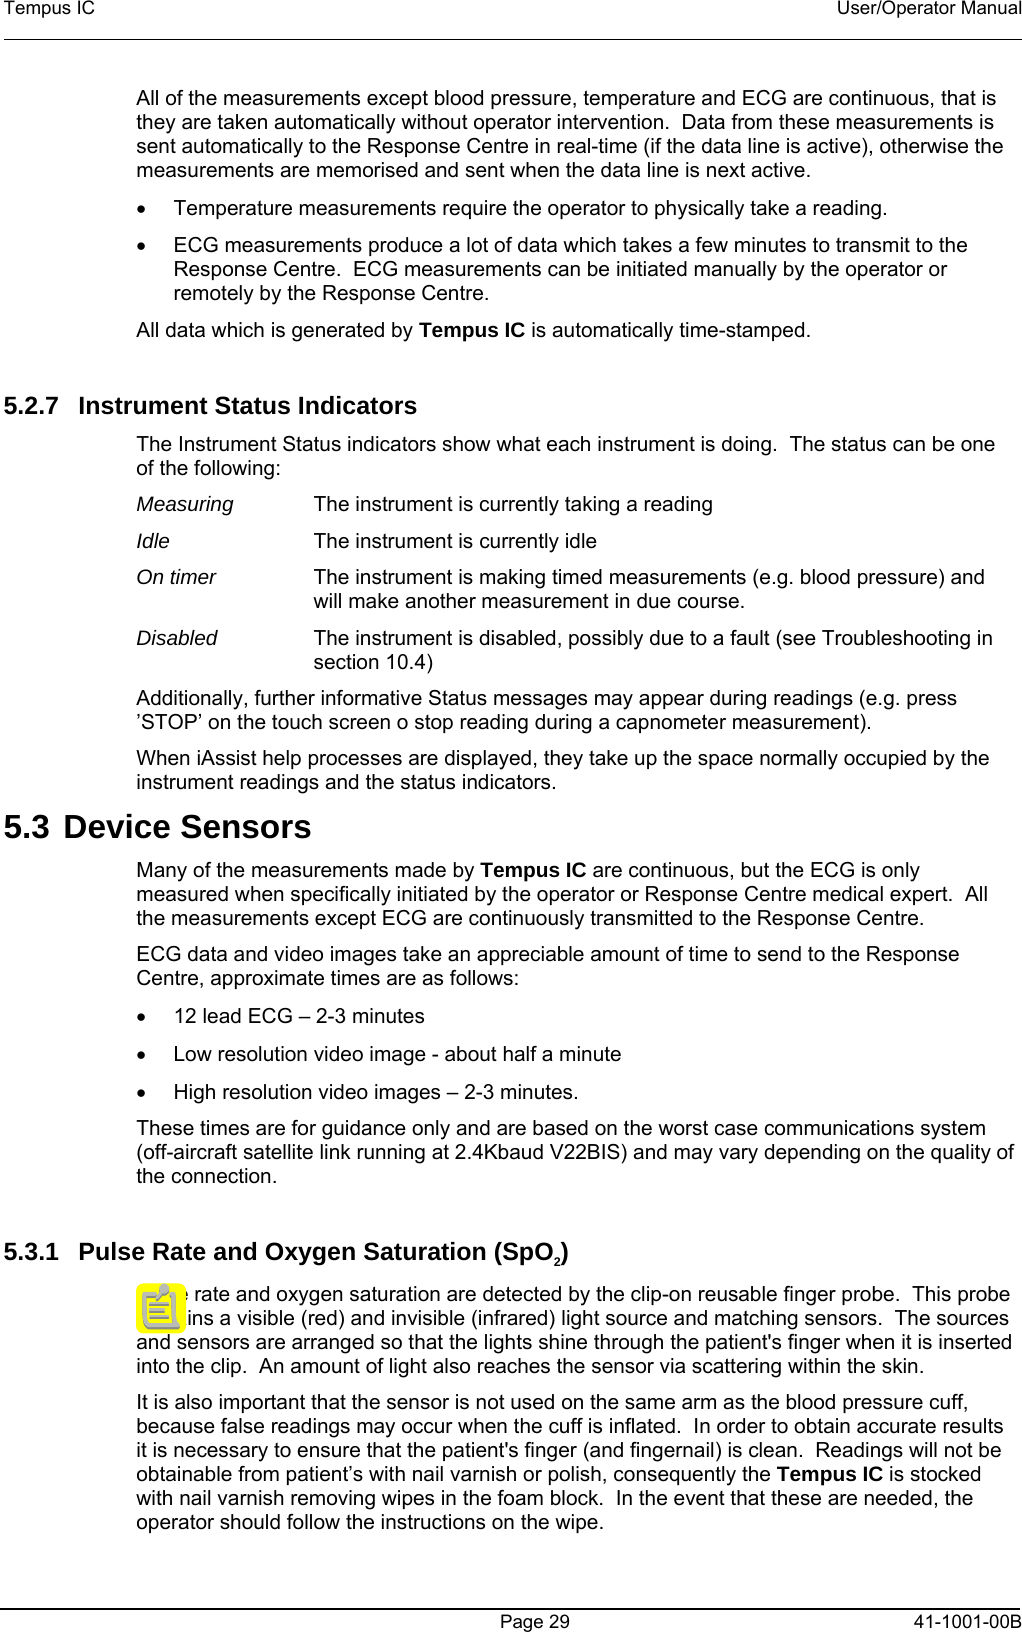 Tempus IC    User/Operator Manual      Page 29   41-1001-00B All of the measurements except blood pressure, temperature and ECG are continuous, that is they are taken automatically without operator intervention.  Data from these measurements is sent automatically to the Response Centre in real-time (if the data line is active), otherwise the measurements are memorised and sent when the data line is next active. •  Temperature measurements require the operator to physically take a reading.  •  ECG measurements produce a lot of data which takes a few minutes to transmit to the Response Centre.  ECG measurements can be initiated manually by the operator or remotely by the Response Centre. All data which is generated by Tempus IC is automatically time-stamped.  5.2.7 Instrument Status Indicators The Instrument Status indicators show what each instrument is doing.  The status can be one of the following: Measuring  The instrument is currently taking a reading Idle  The instrument is currently idle On timer  The instrument is making timed measurements (e.g. blood pressure) and will make another measurement in due course.   Disabled  The instrument is disabled, possibly due to a fault (see Troubleshooting in section 10.4) Additionally, further informative Status messages may appear during readings (e.g. press ’STOP’ on the touch screen o stop reading during a capnometer measurement). When iAssist help processes are displayed, they take up the space normally occupied by the instrument readings and the status indicators. 5.3 Device Sensors Many of the measurements made by Tempus IC are continuous, but the ECG is only measured when specifically initiated by the operator or Response Centre medical expert.  All the measurements except ECG are continuously transmitted to the Response Centre.  ECG data and video images take an appreciable amount of time to send to the Response Centre, approximate times are as follows: •  12 lead ECG – 2-3 minutes •  Low resolution video image - about half a minute •  High resolution video images – 2-3 minutes. These times are for guidance only and are based on the worst case communications system (off-aircraft satellite link running at 2.4Kbaud V22BIS) and may vary depending on the quality of the connection.  5.3.1  Pulse Rate and Oxygen Saturation (SpO2) Pulse rate and oxygen saturation are detected by the clip-on reusable finger probe.  This probe contains a visible (red) and invisible (infrared) light source and matching sensors.  The sources and sensors are arranged so that the lights shine through the patient&apos;s finger when it is inserted into the clip.  An amount of light also reaches the sensor via scattering within the skin. It is also important that the sensor is not used on the same arm as the blood pressure cuff, because false readings may occur when the cuff is inflated.  In order to obtain accurate results it is necessary to ensure that the patient&apos;s finger (and fingernail) is clean.  Readings will not be obtainable from patient’s with nail varnish or polish, consequently the Tempus IC is stocked with nail varnish removing wipes in the foam block.  In the event that these are needed, the operator should follow the instructions on the wipe. 